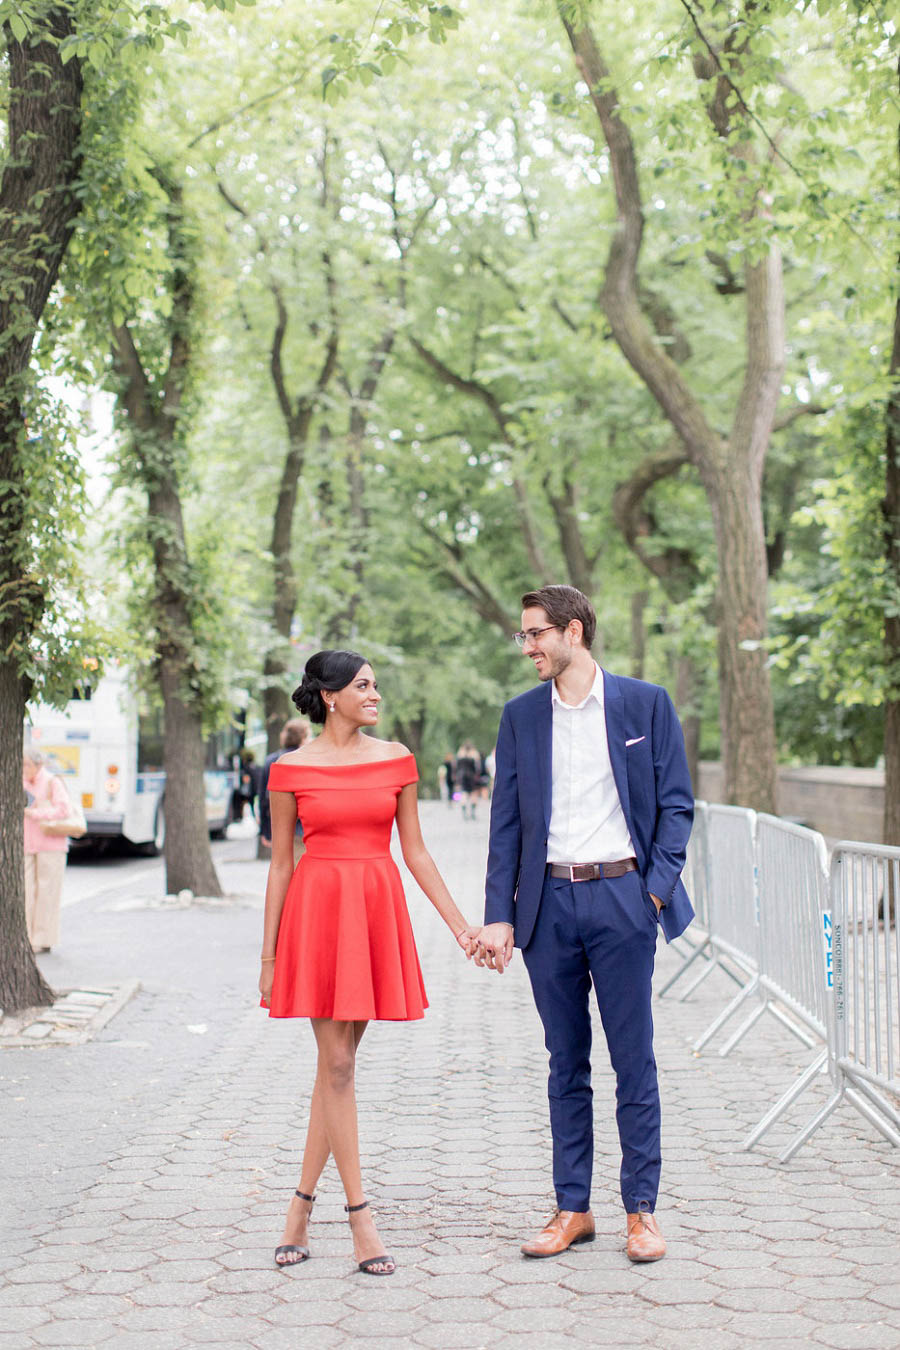 Couple poses on the sidewalk outside of Central Park in this Central Park engagement photo by NYC wedding photographer Amy Rizzuto